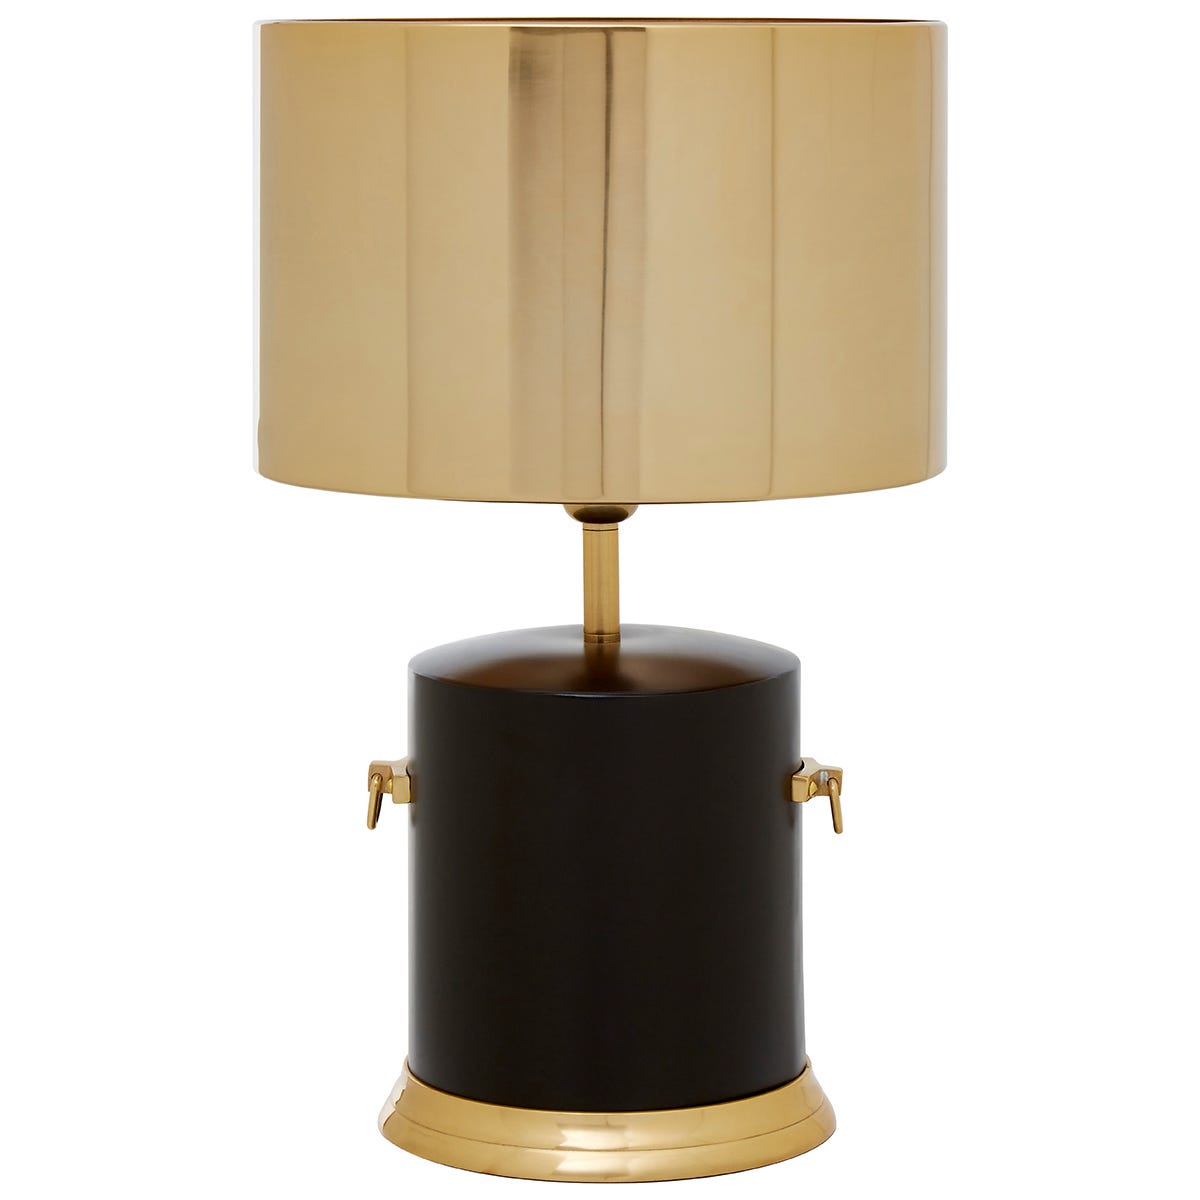 Premier Housewares Melvin Table Lamp in Black with Gold Drum Shade